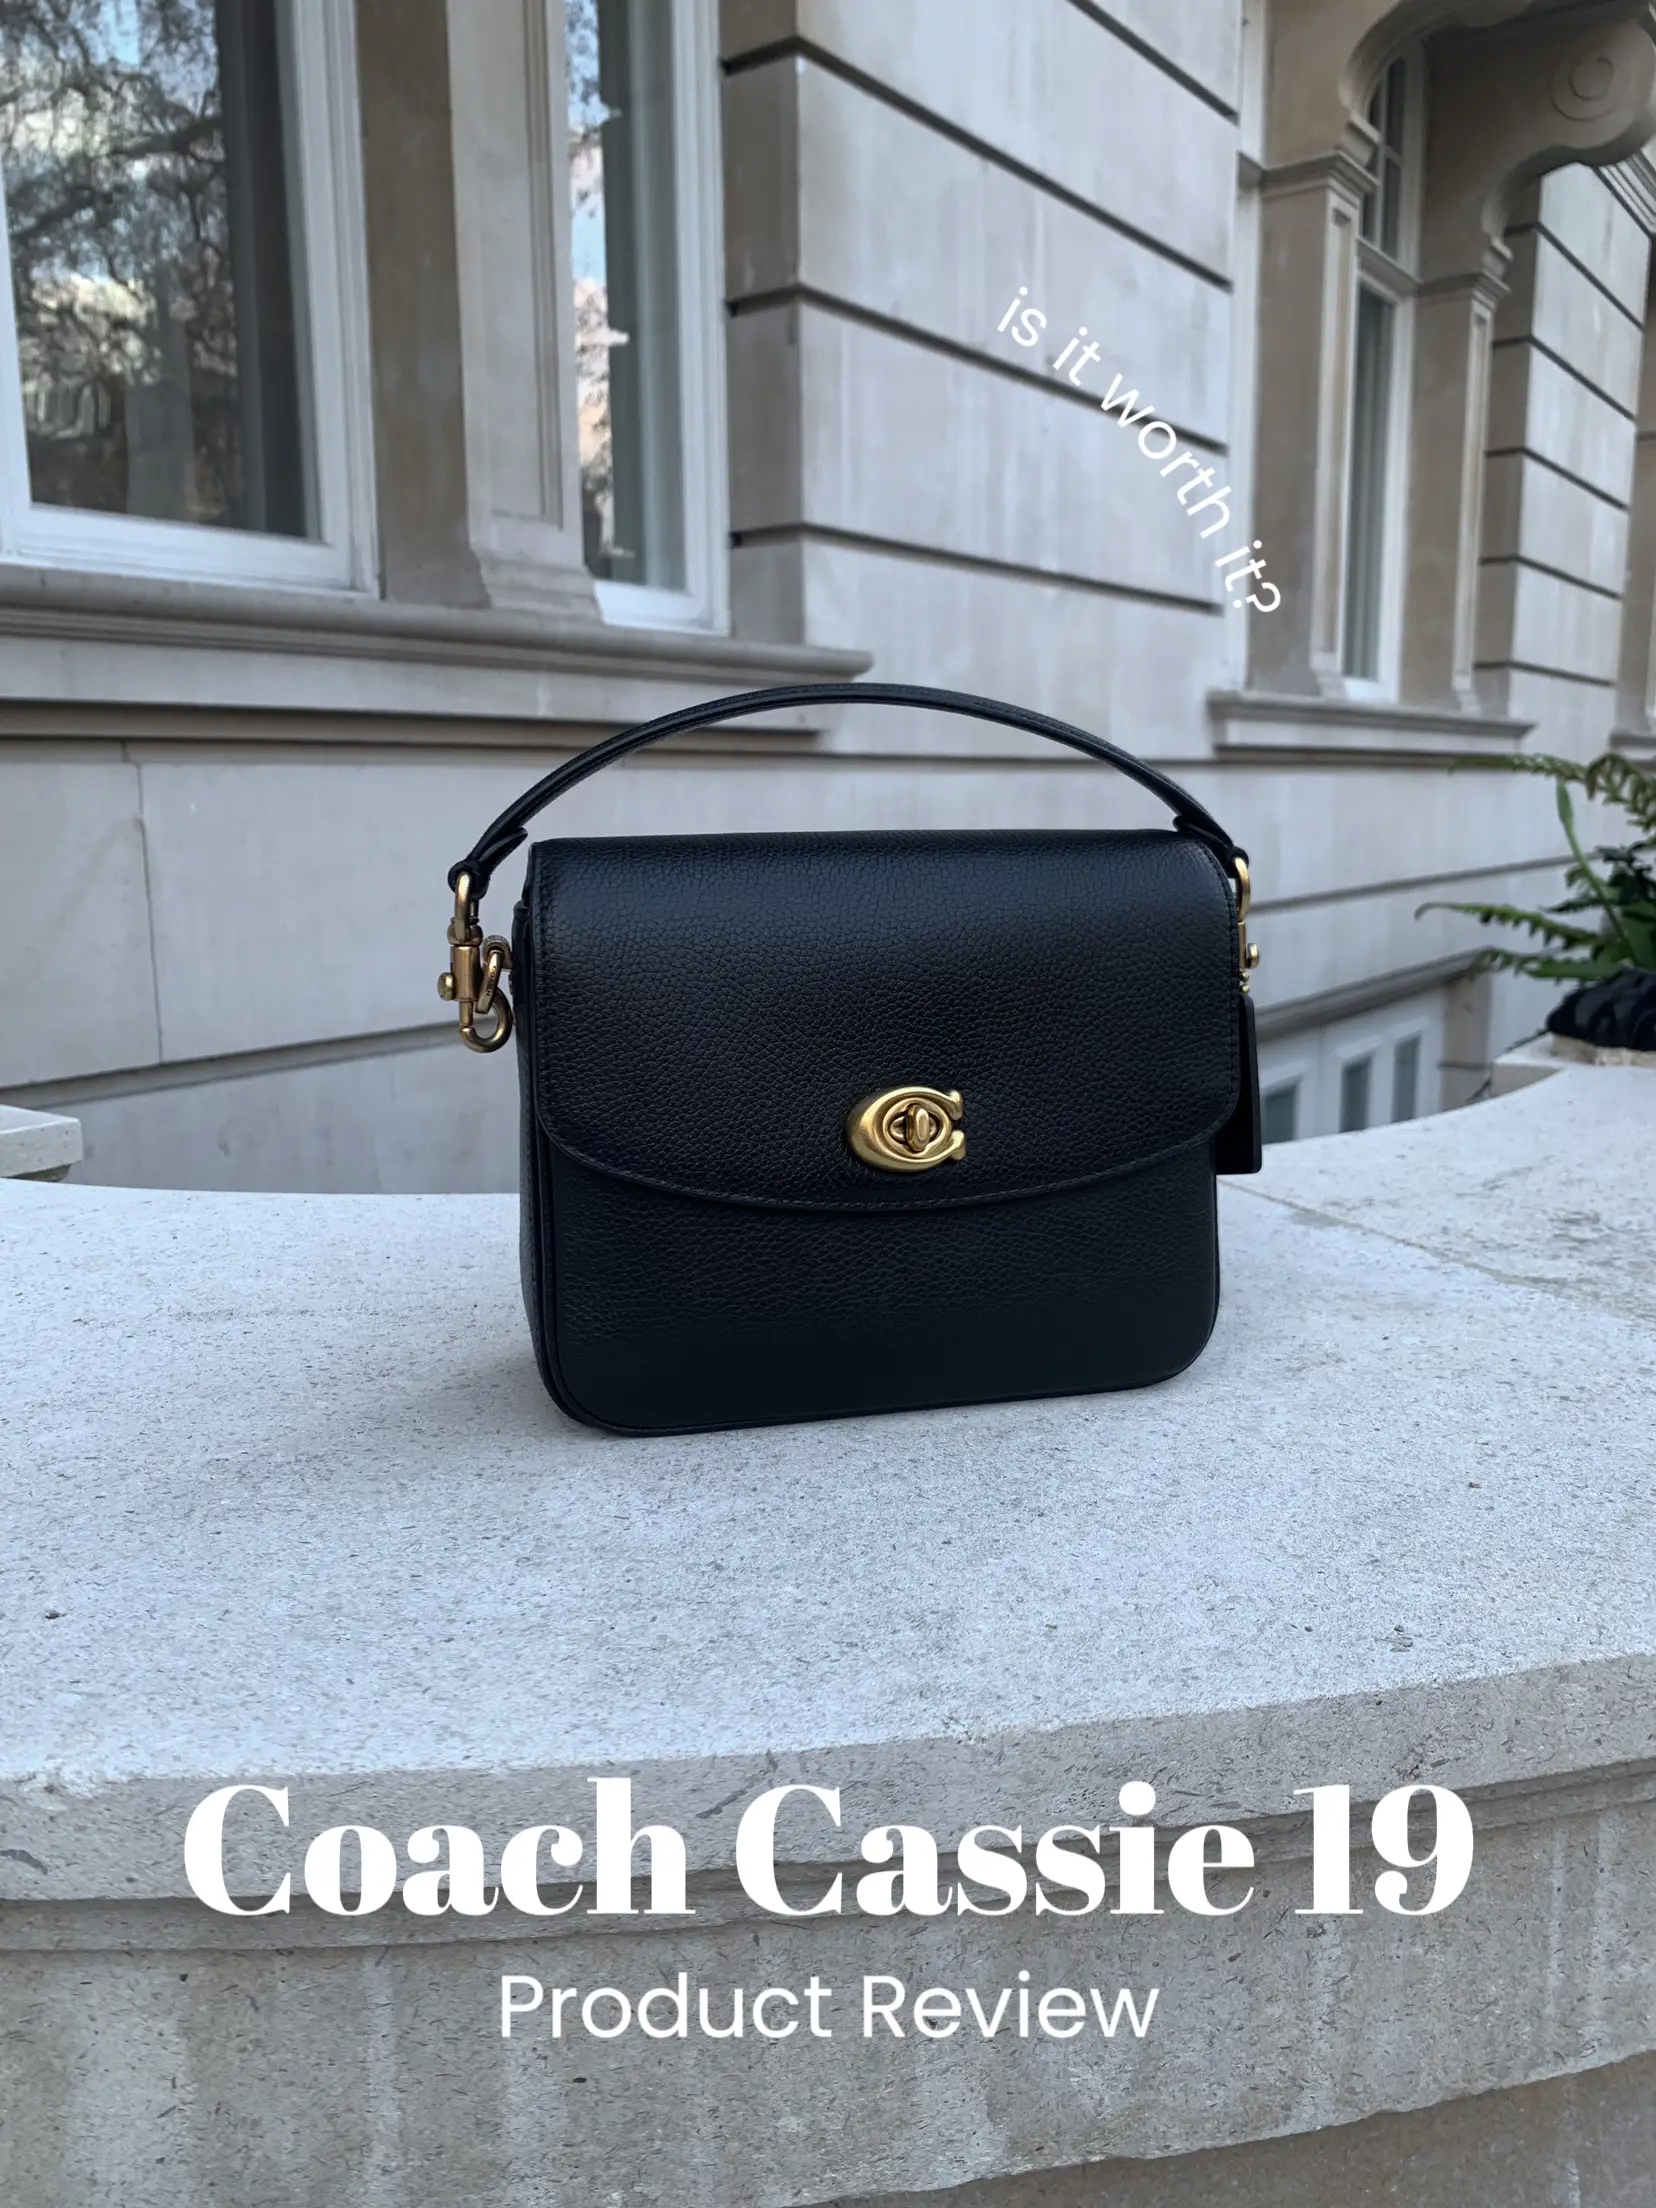 Reviewing the Coach Cassie 19, Gallery posted by Kavveeta